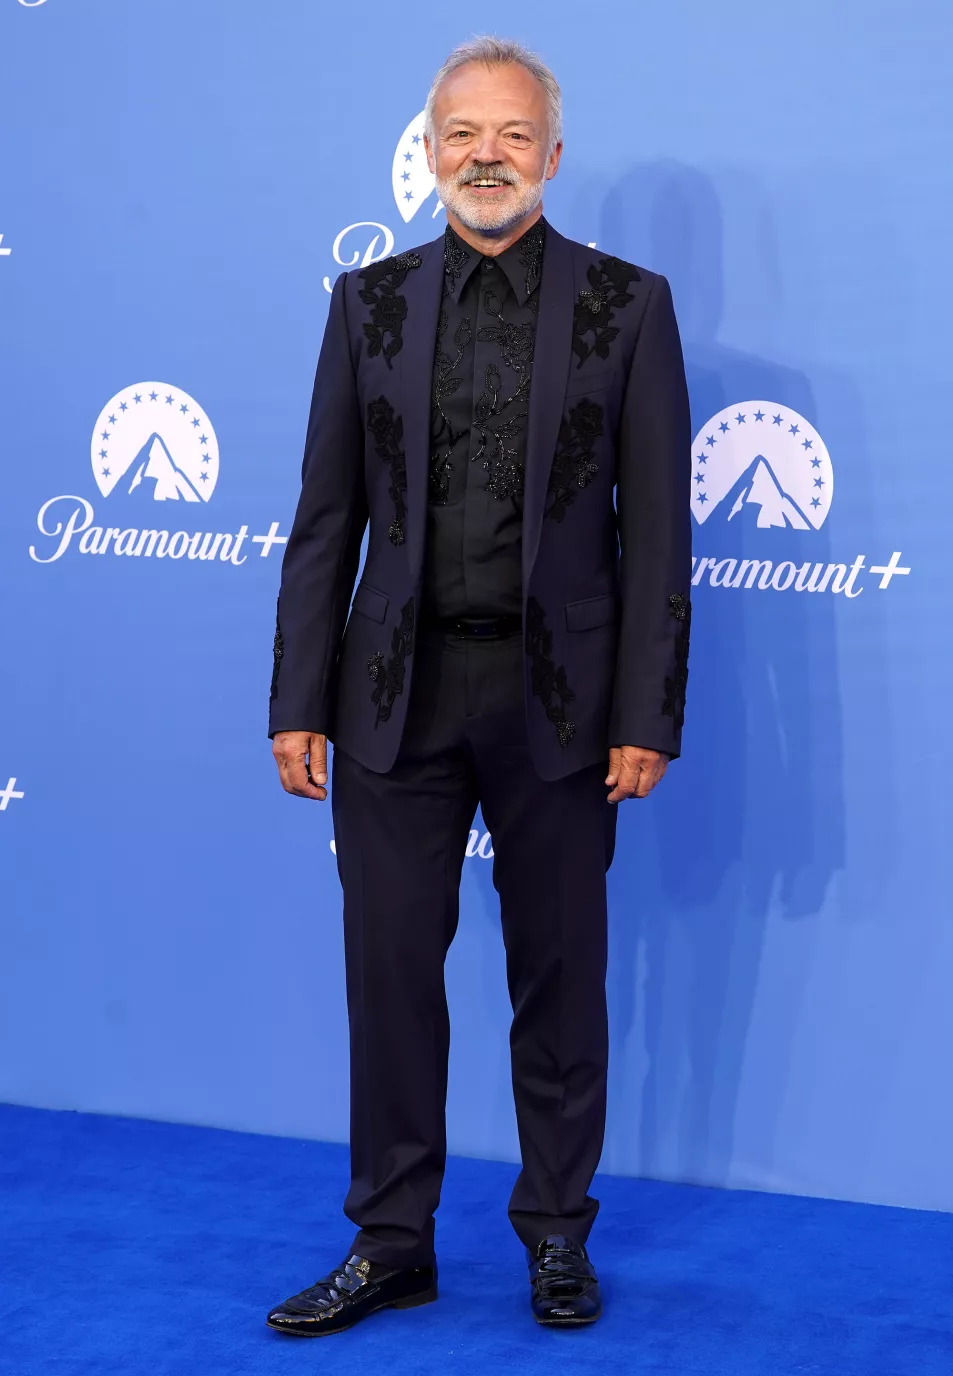 Graham Norton attending the Paramount+ UK launch event in 2022